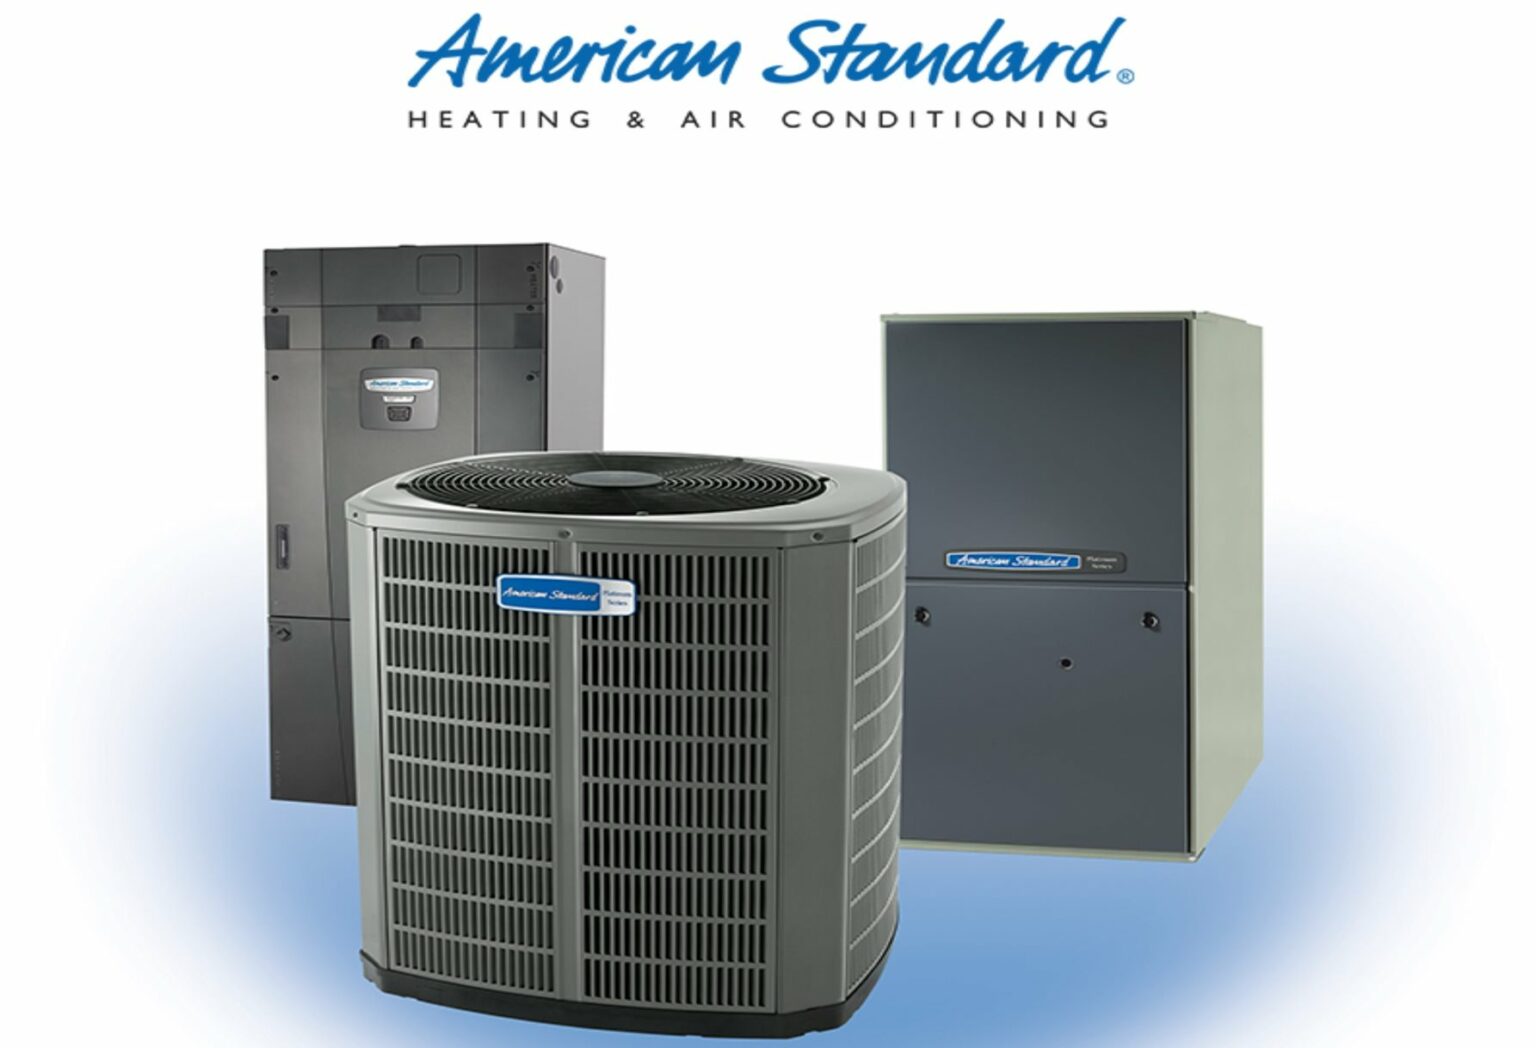 How Much Is A New American Standard Air Conditioner